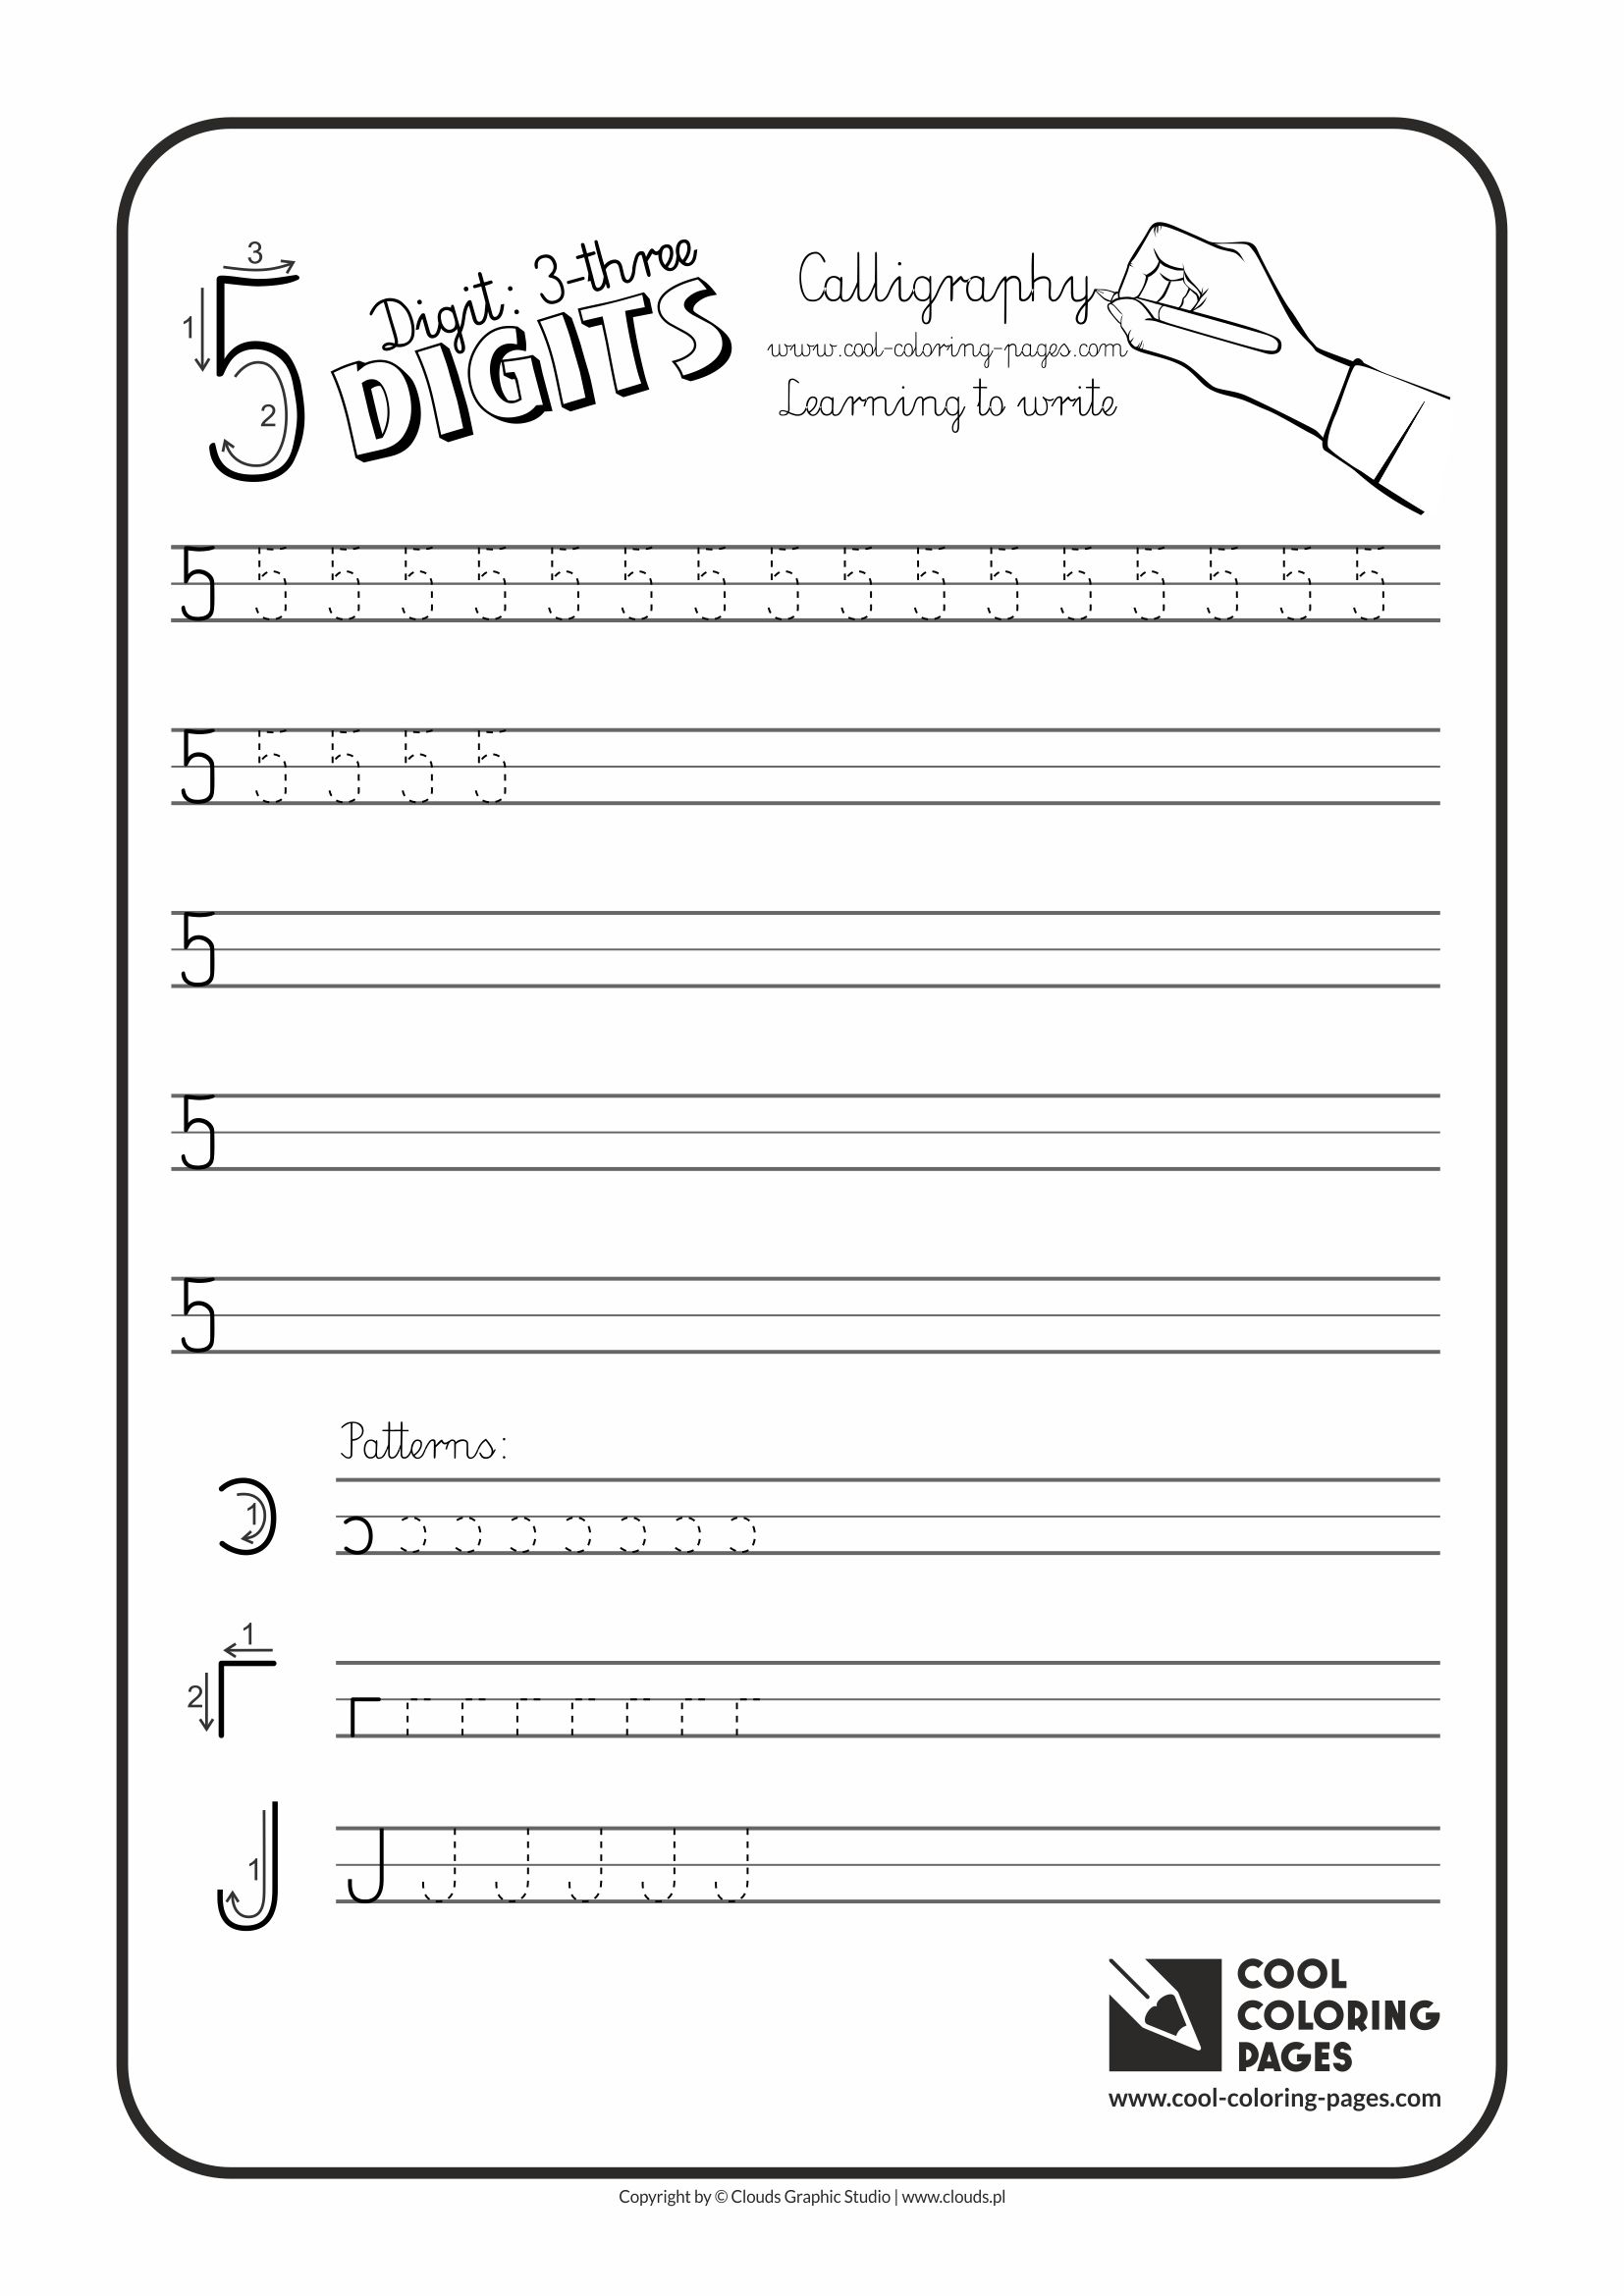 Cool Coloring Pages / Calligraphy / Digit 5 / Handwriting for kids